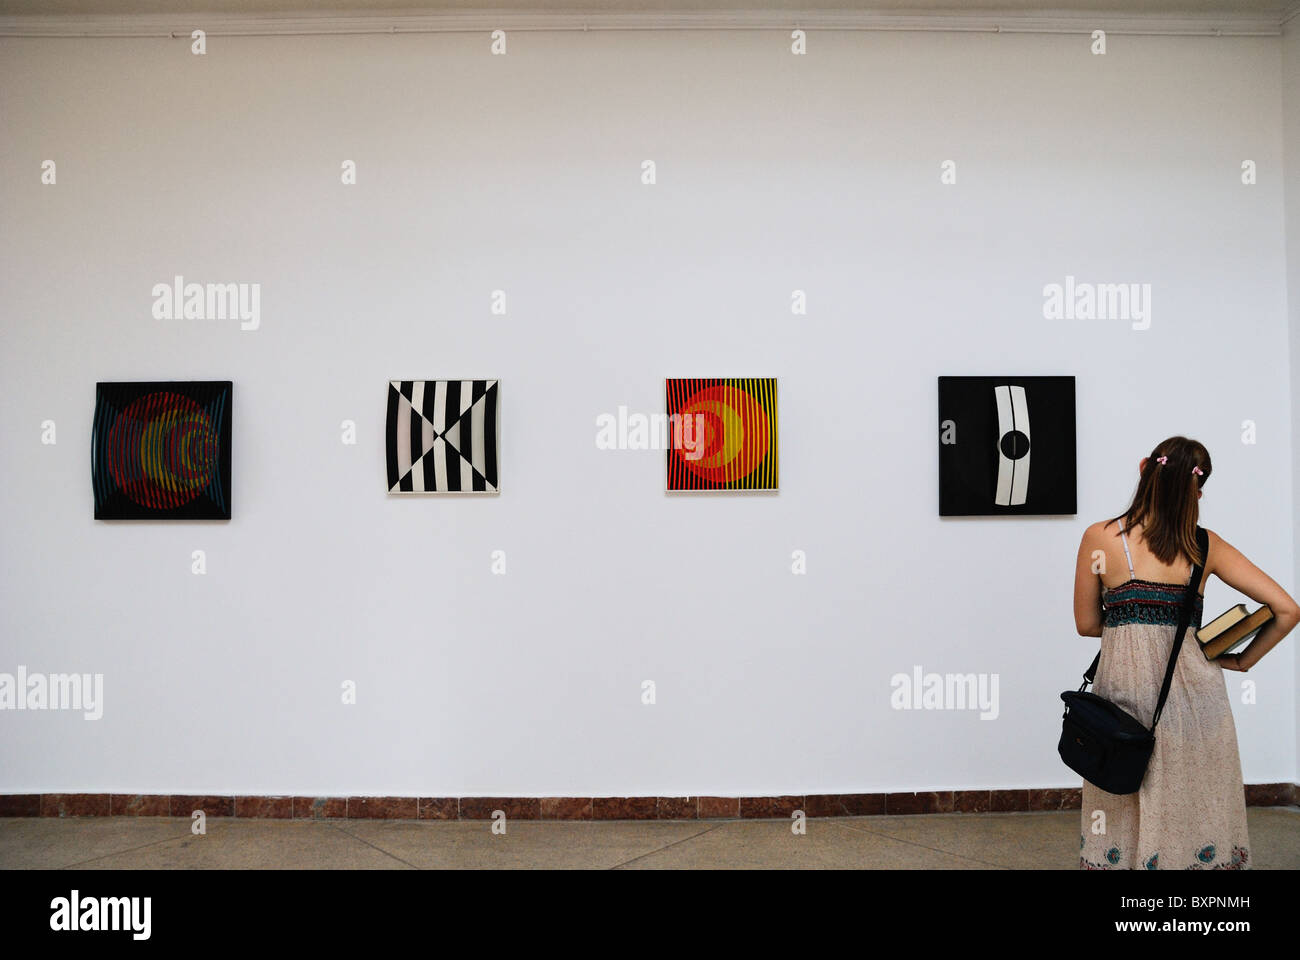 The exhibition of creative modern art objects in Lviv, Ukraine Stock Photo